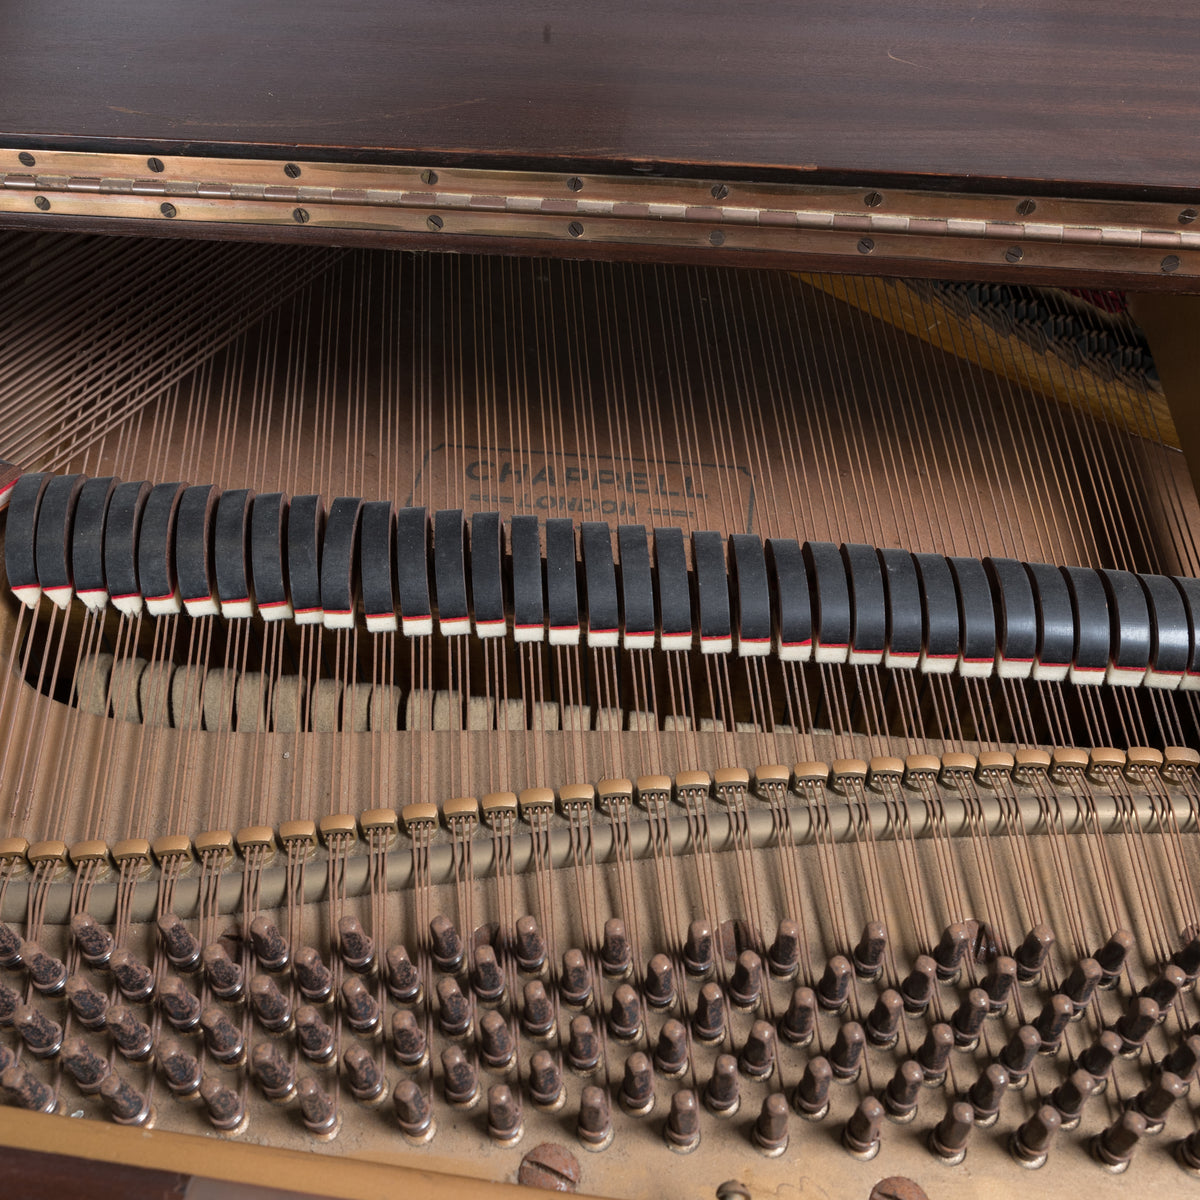 Reclaimed Chappell Baby Grand Piano in Mahogany Circa 1930 | The Architectural Forum